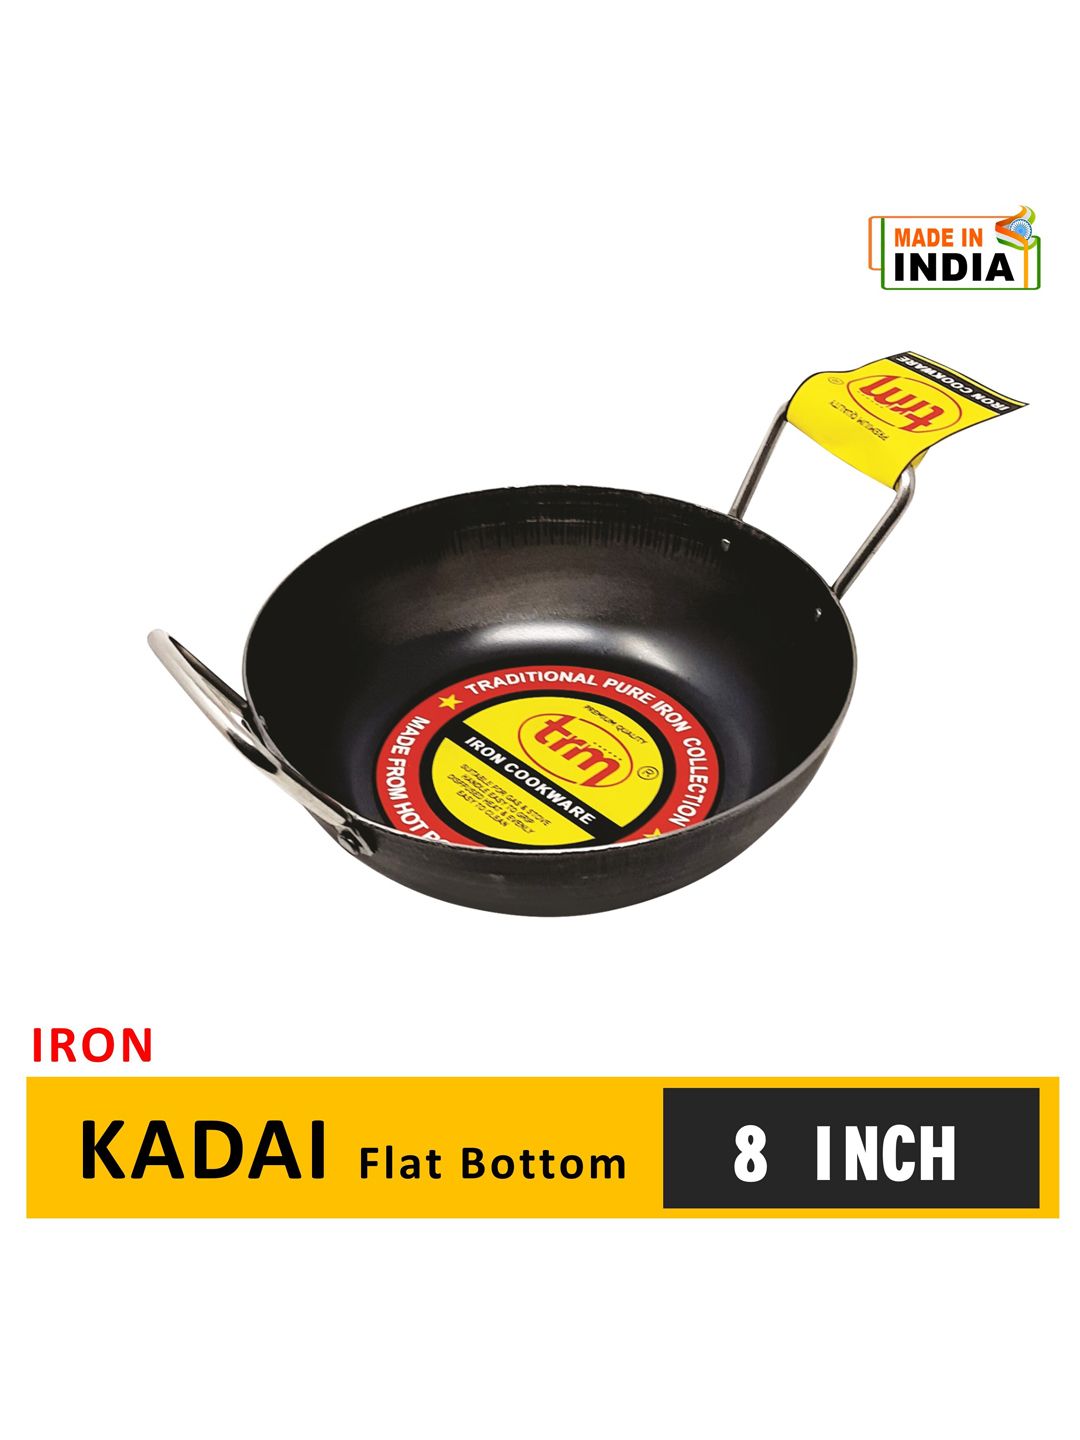 TRM Black and Silver-Coloured Solid Iron Deep-Fry Pan Price in India